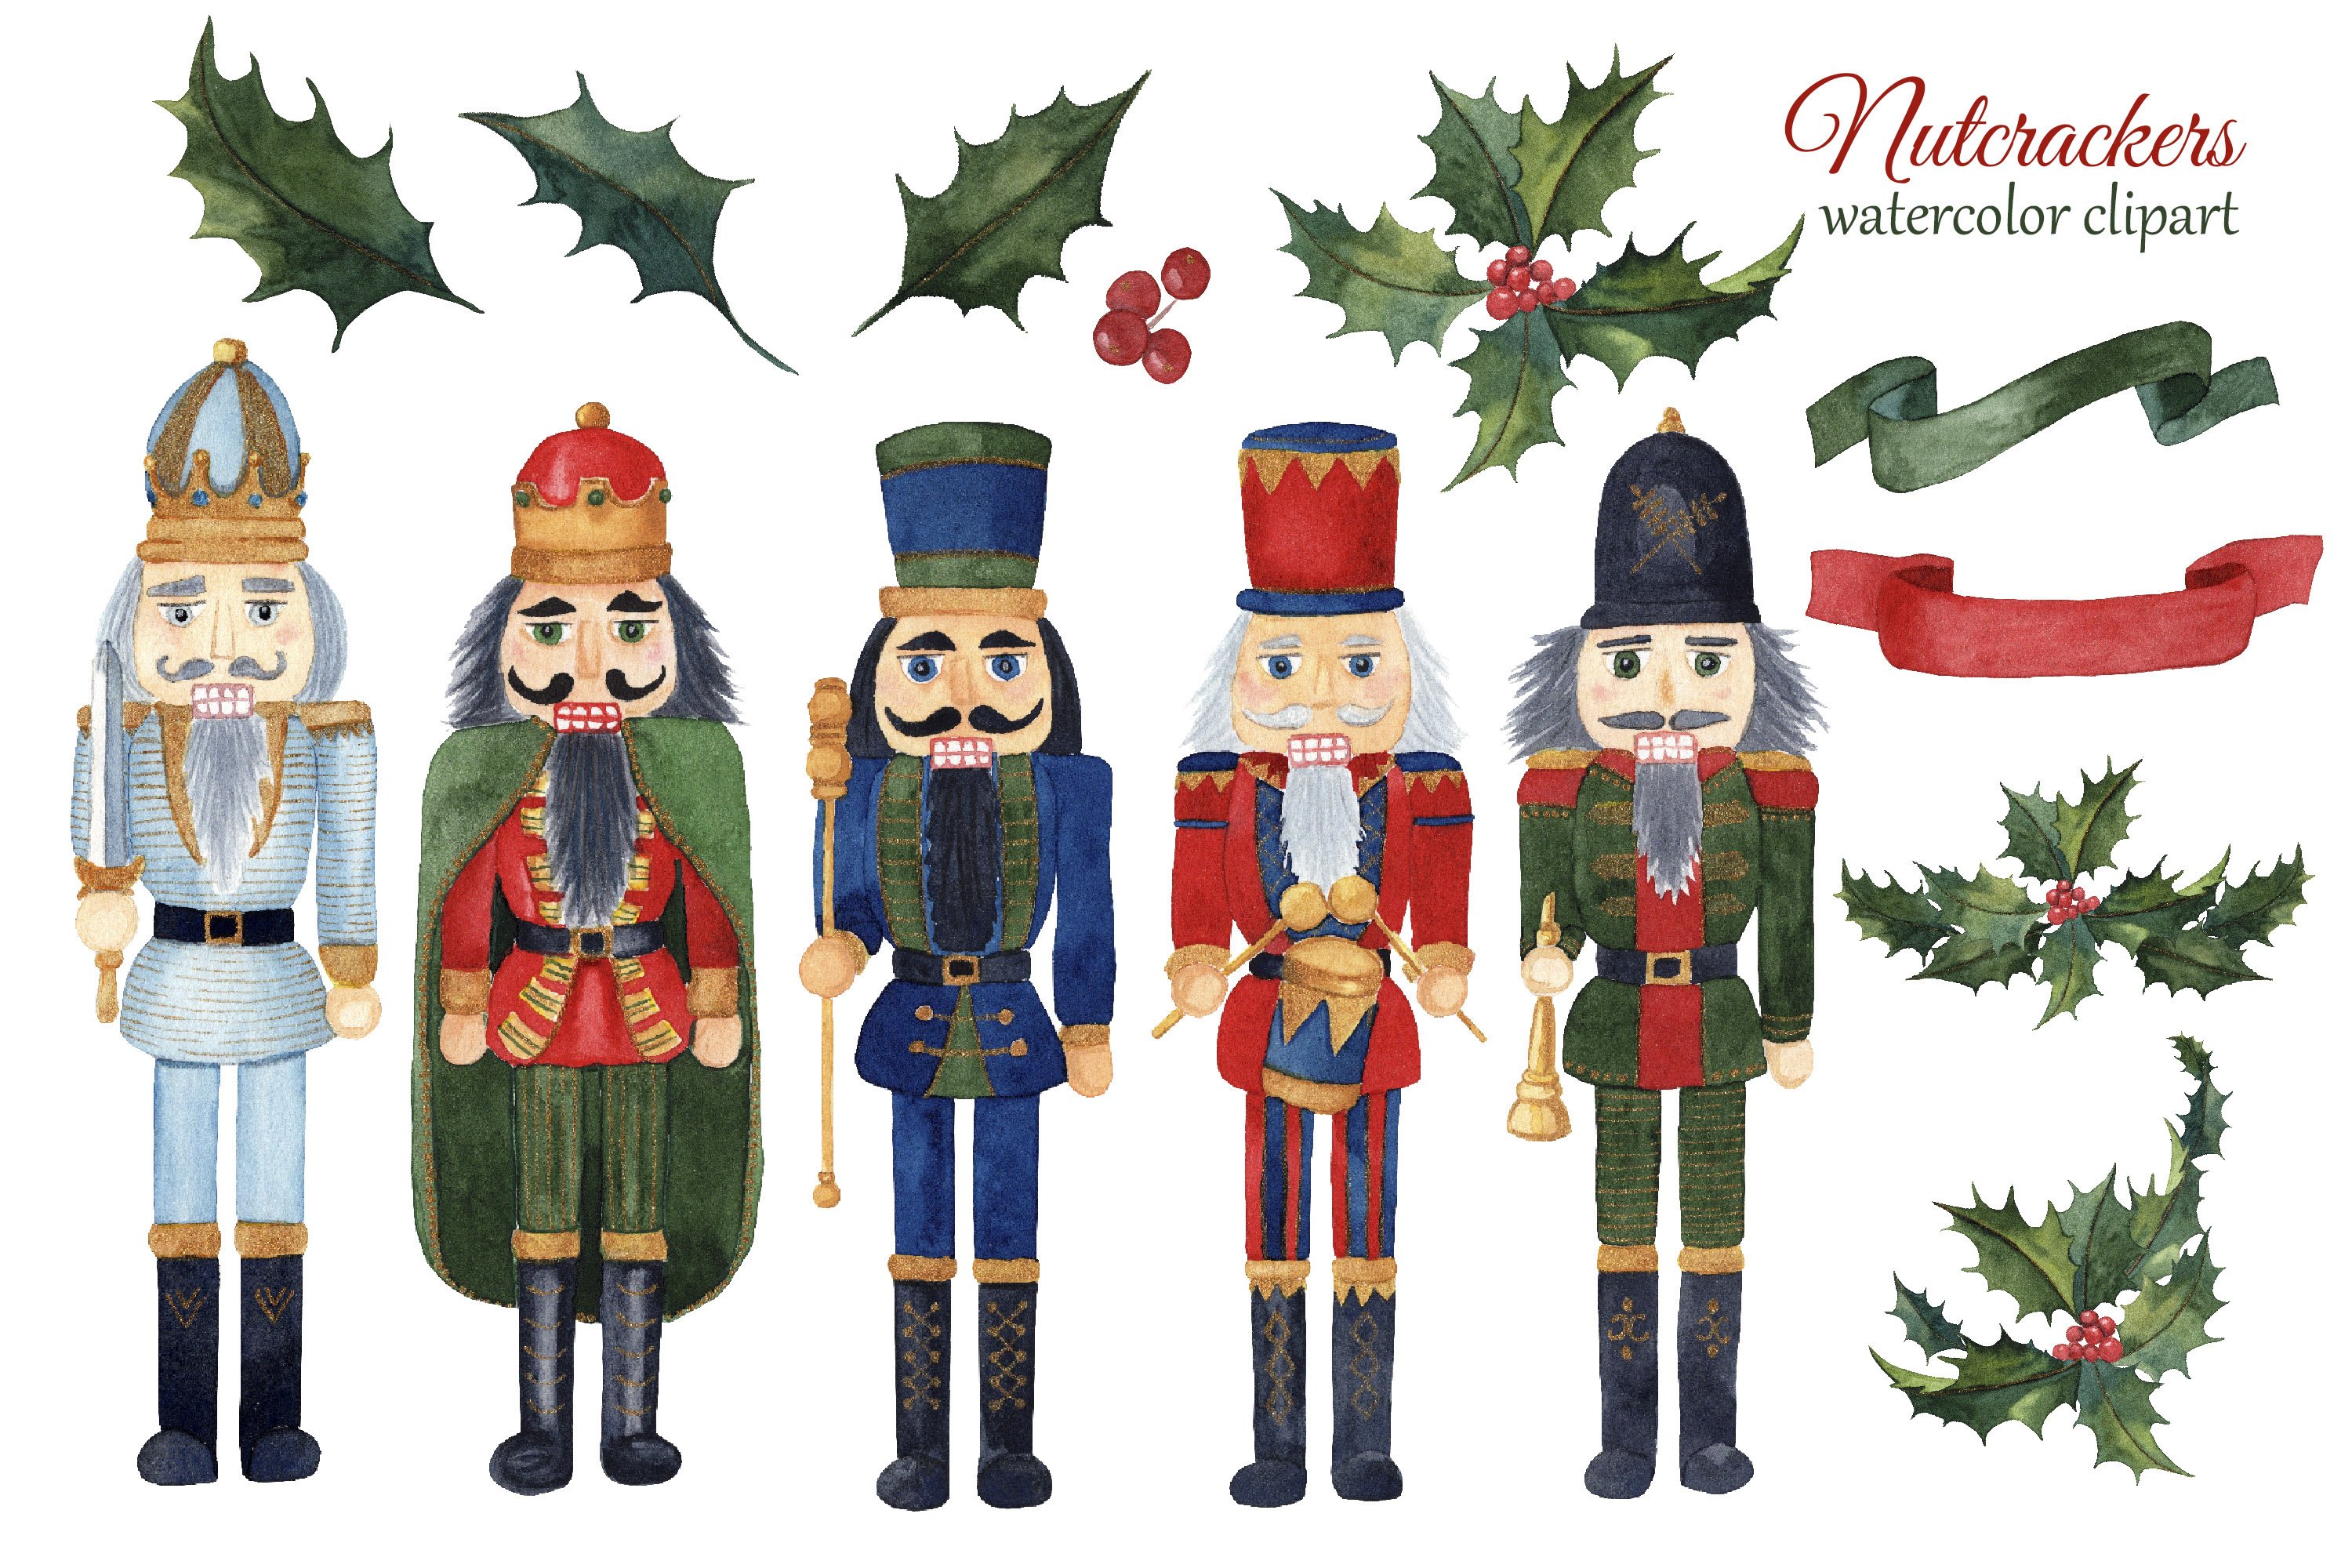 Watercolor Christmas Nutcrackers preview image.